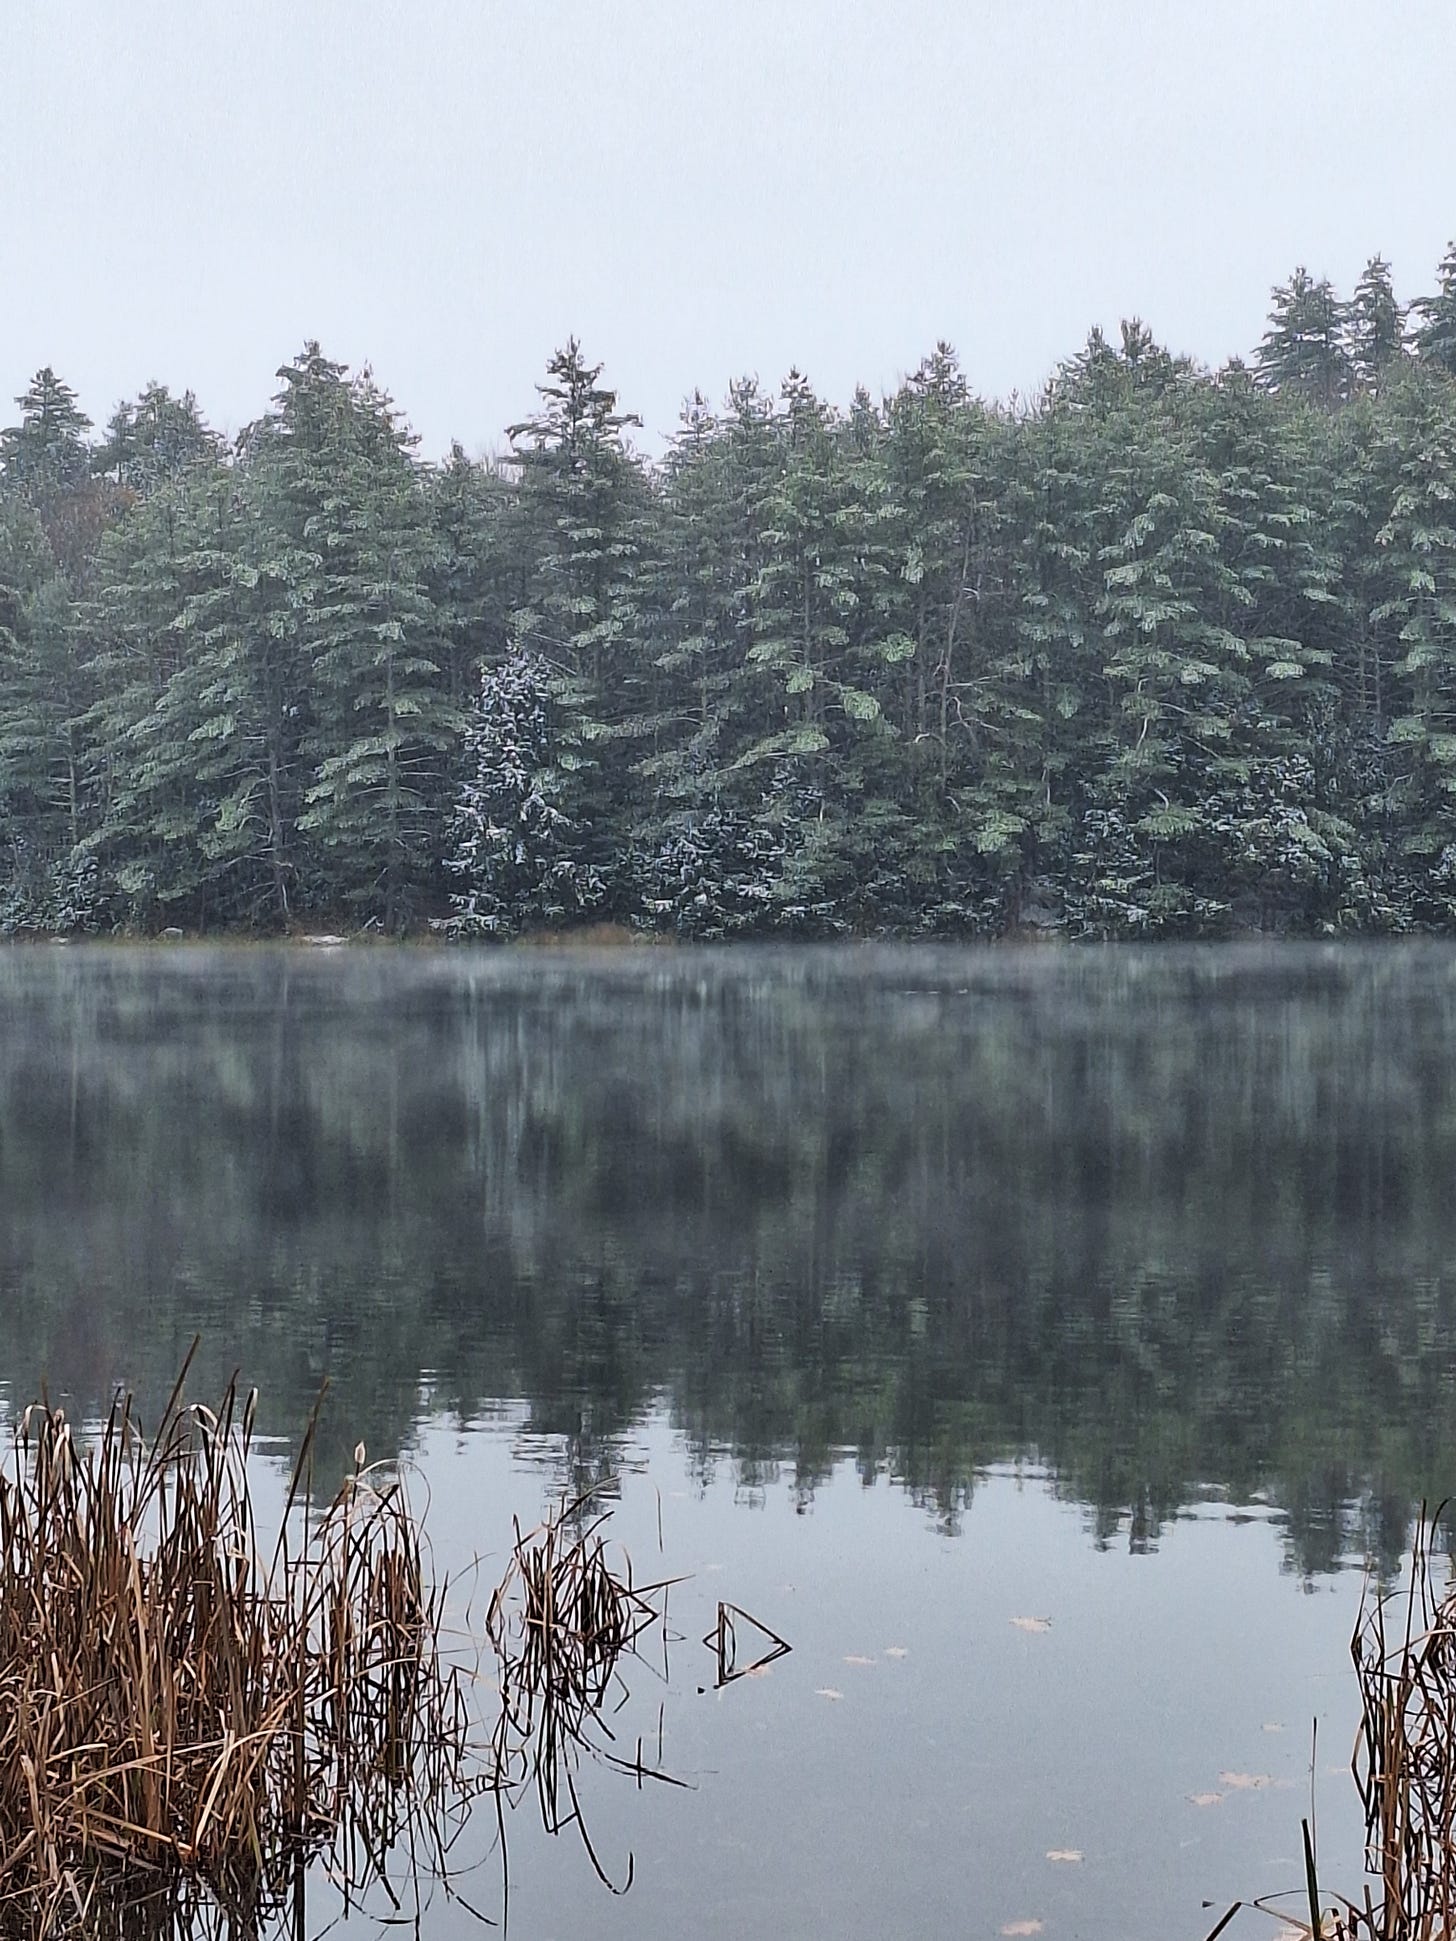 a picture of pine trees from across a pond